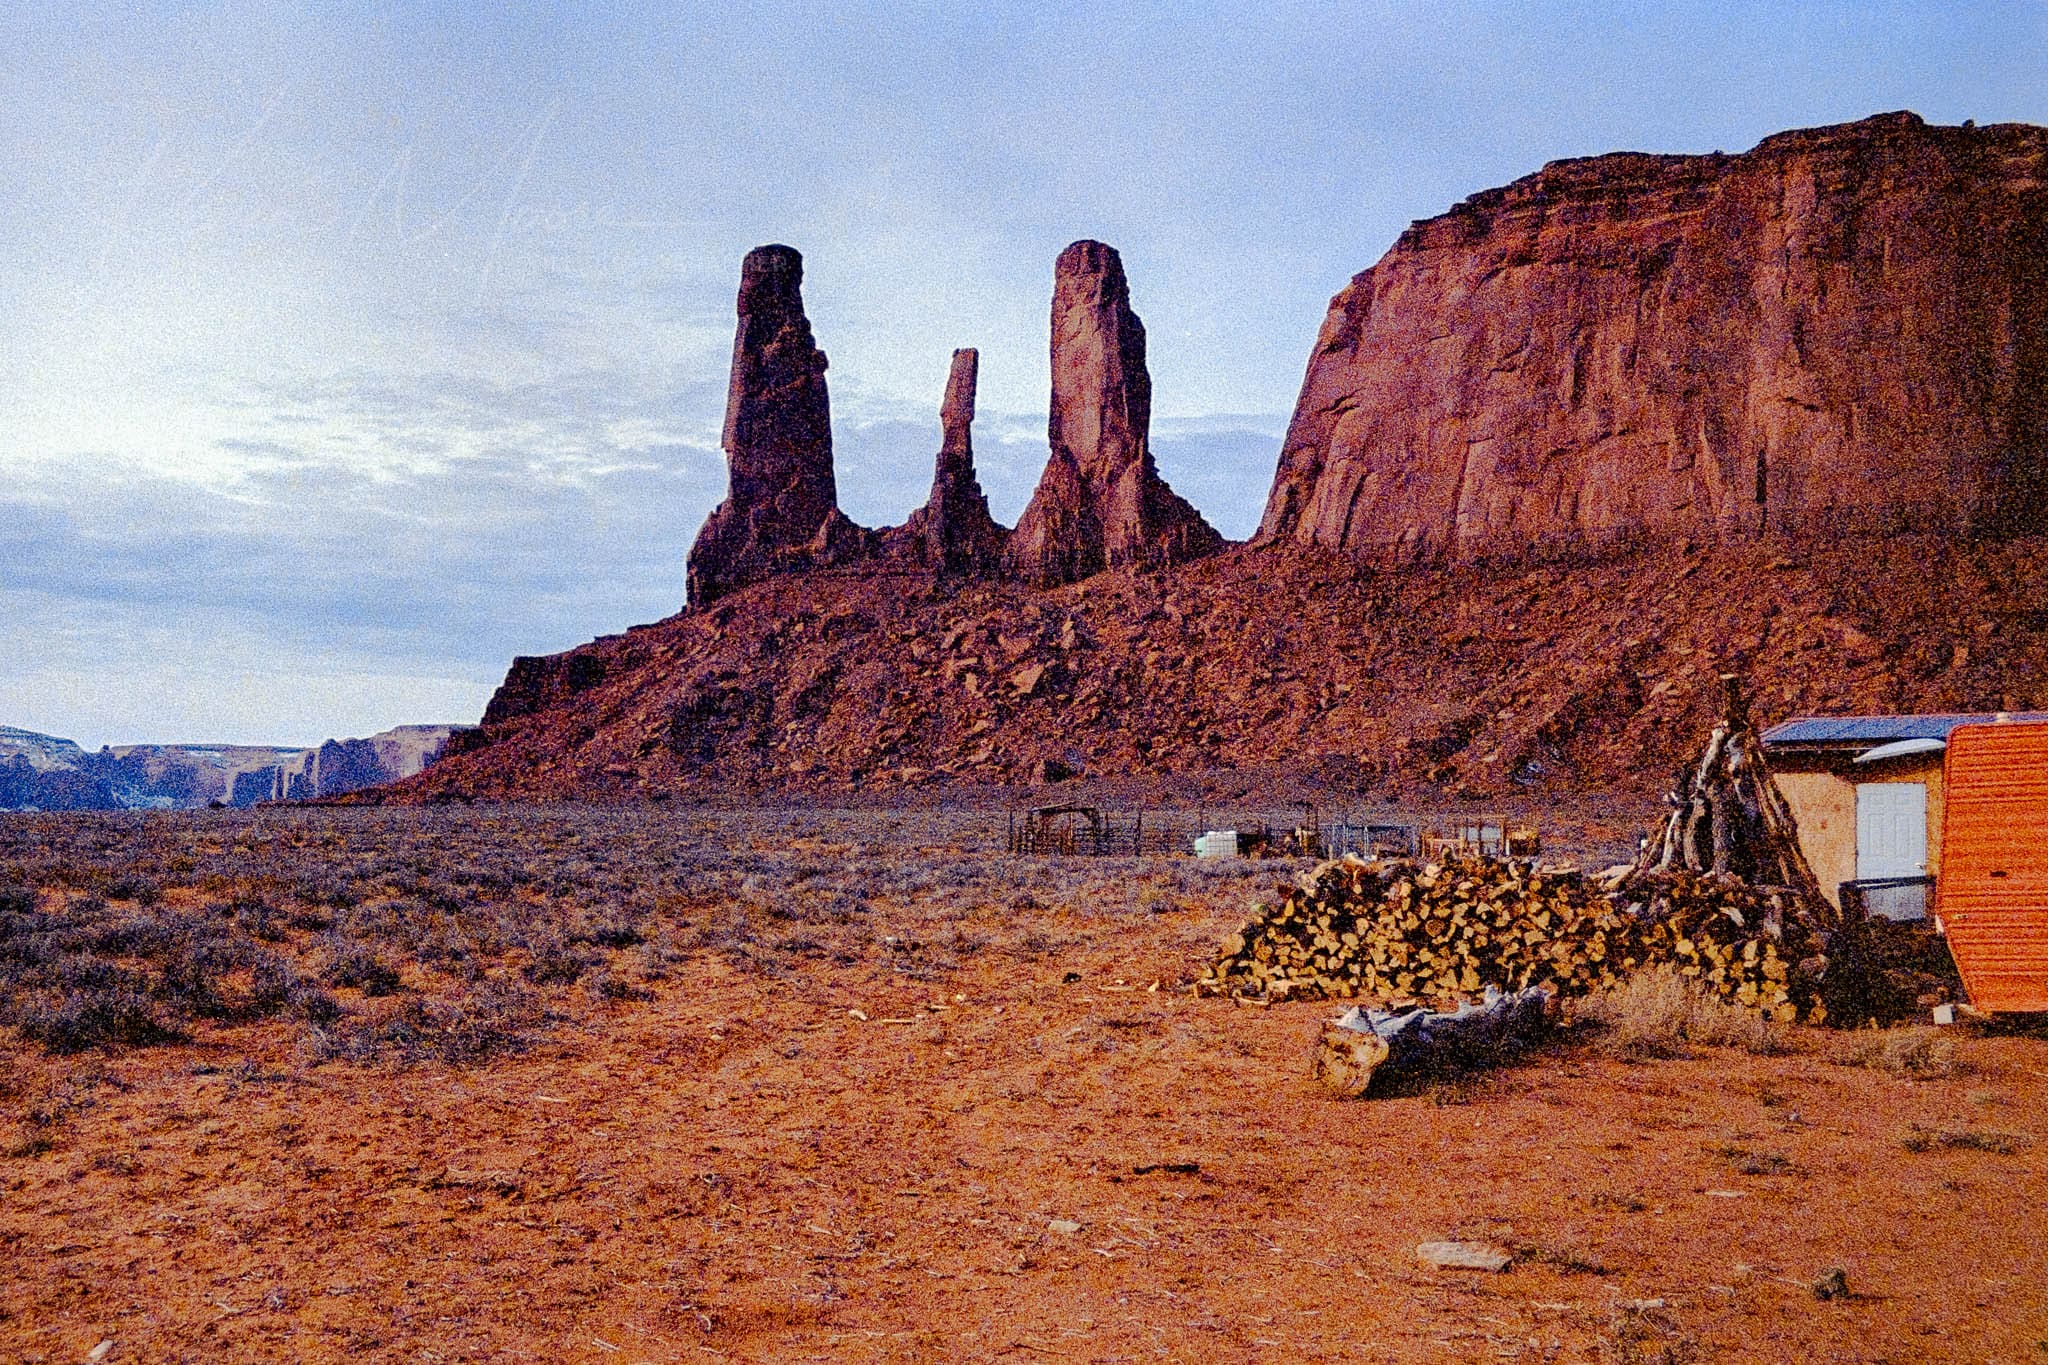 Desert landscape at dusk with buttes and small building in the American Southwest.